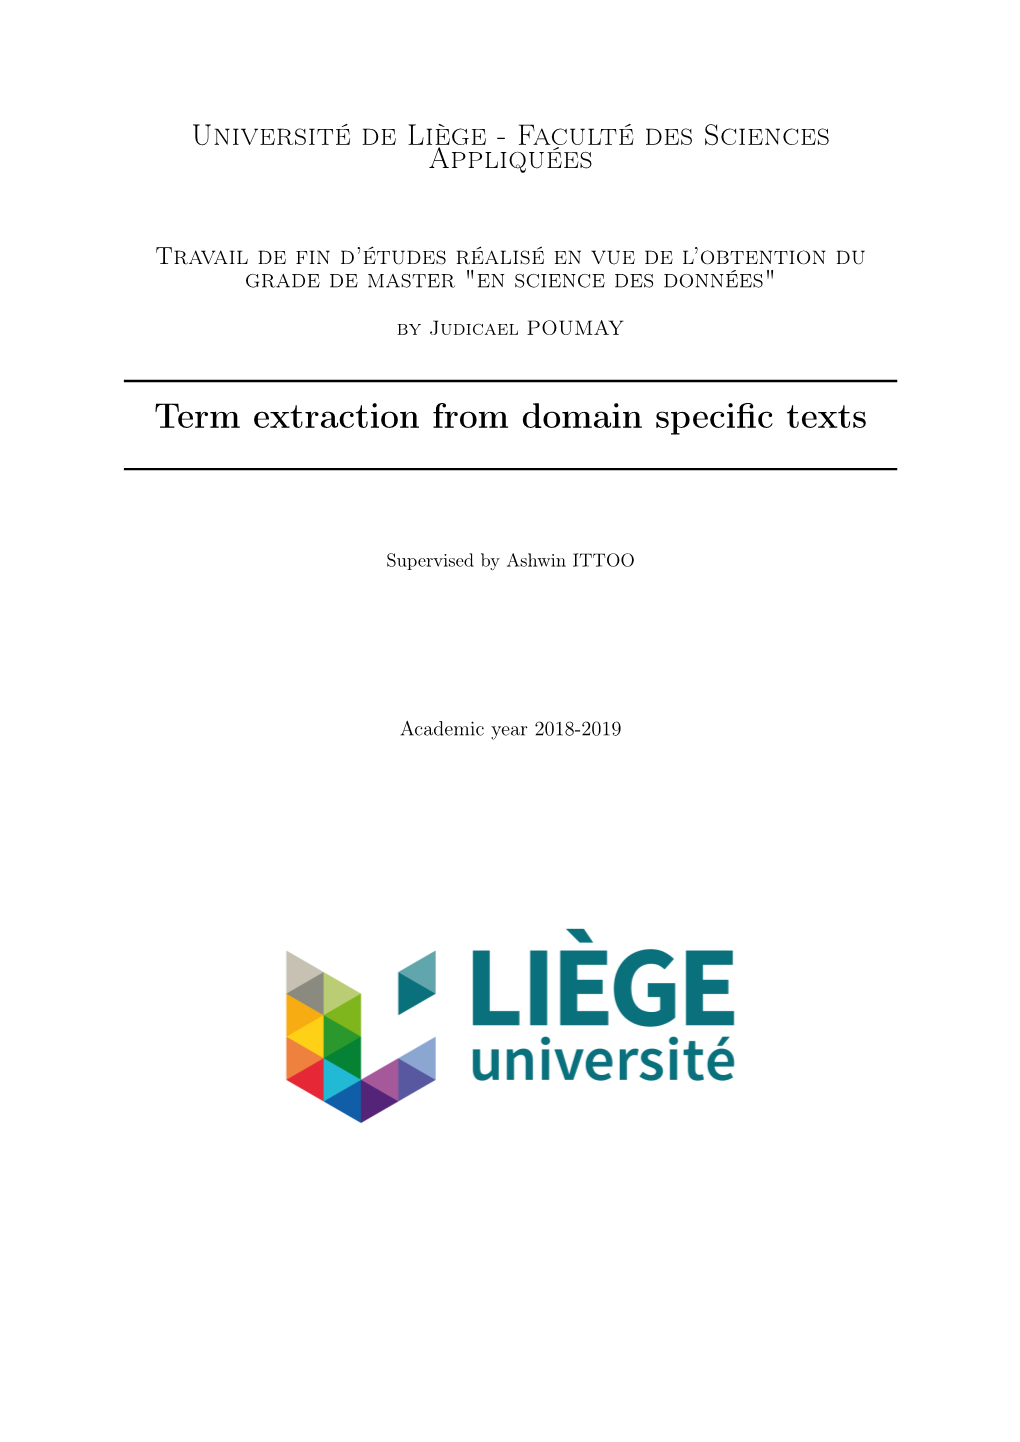 Term Extraction from Domain Specific Texts